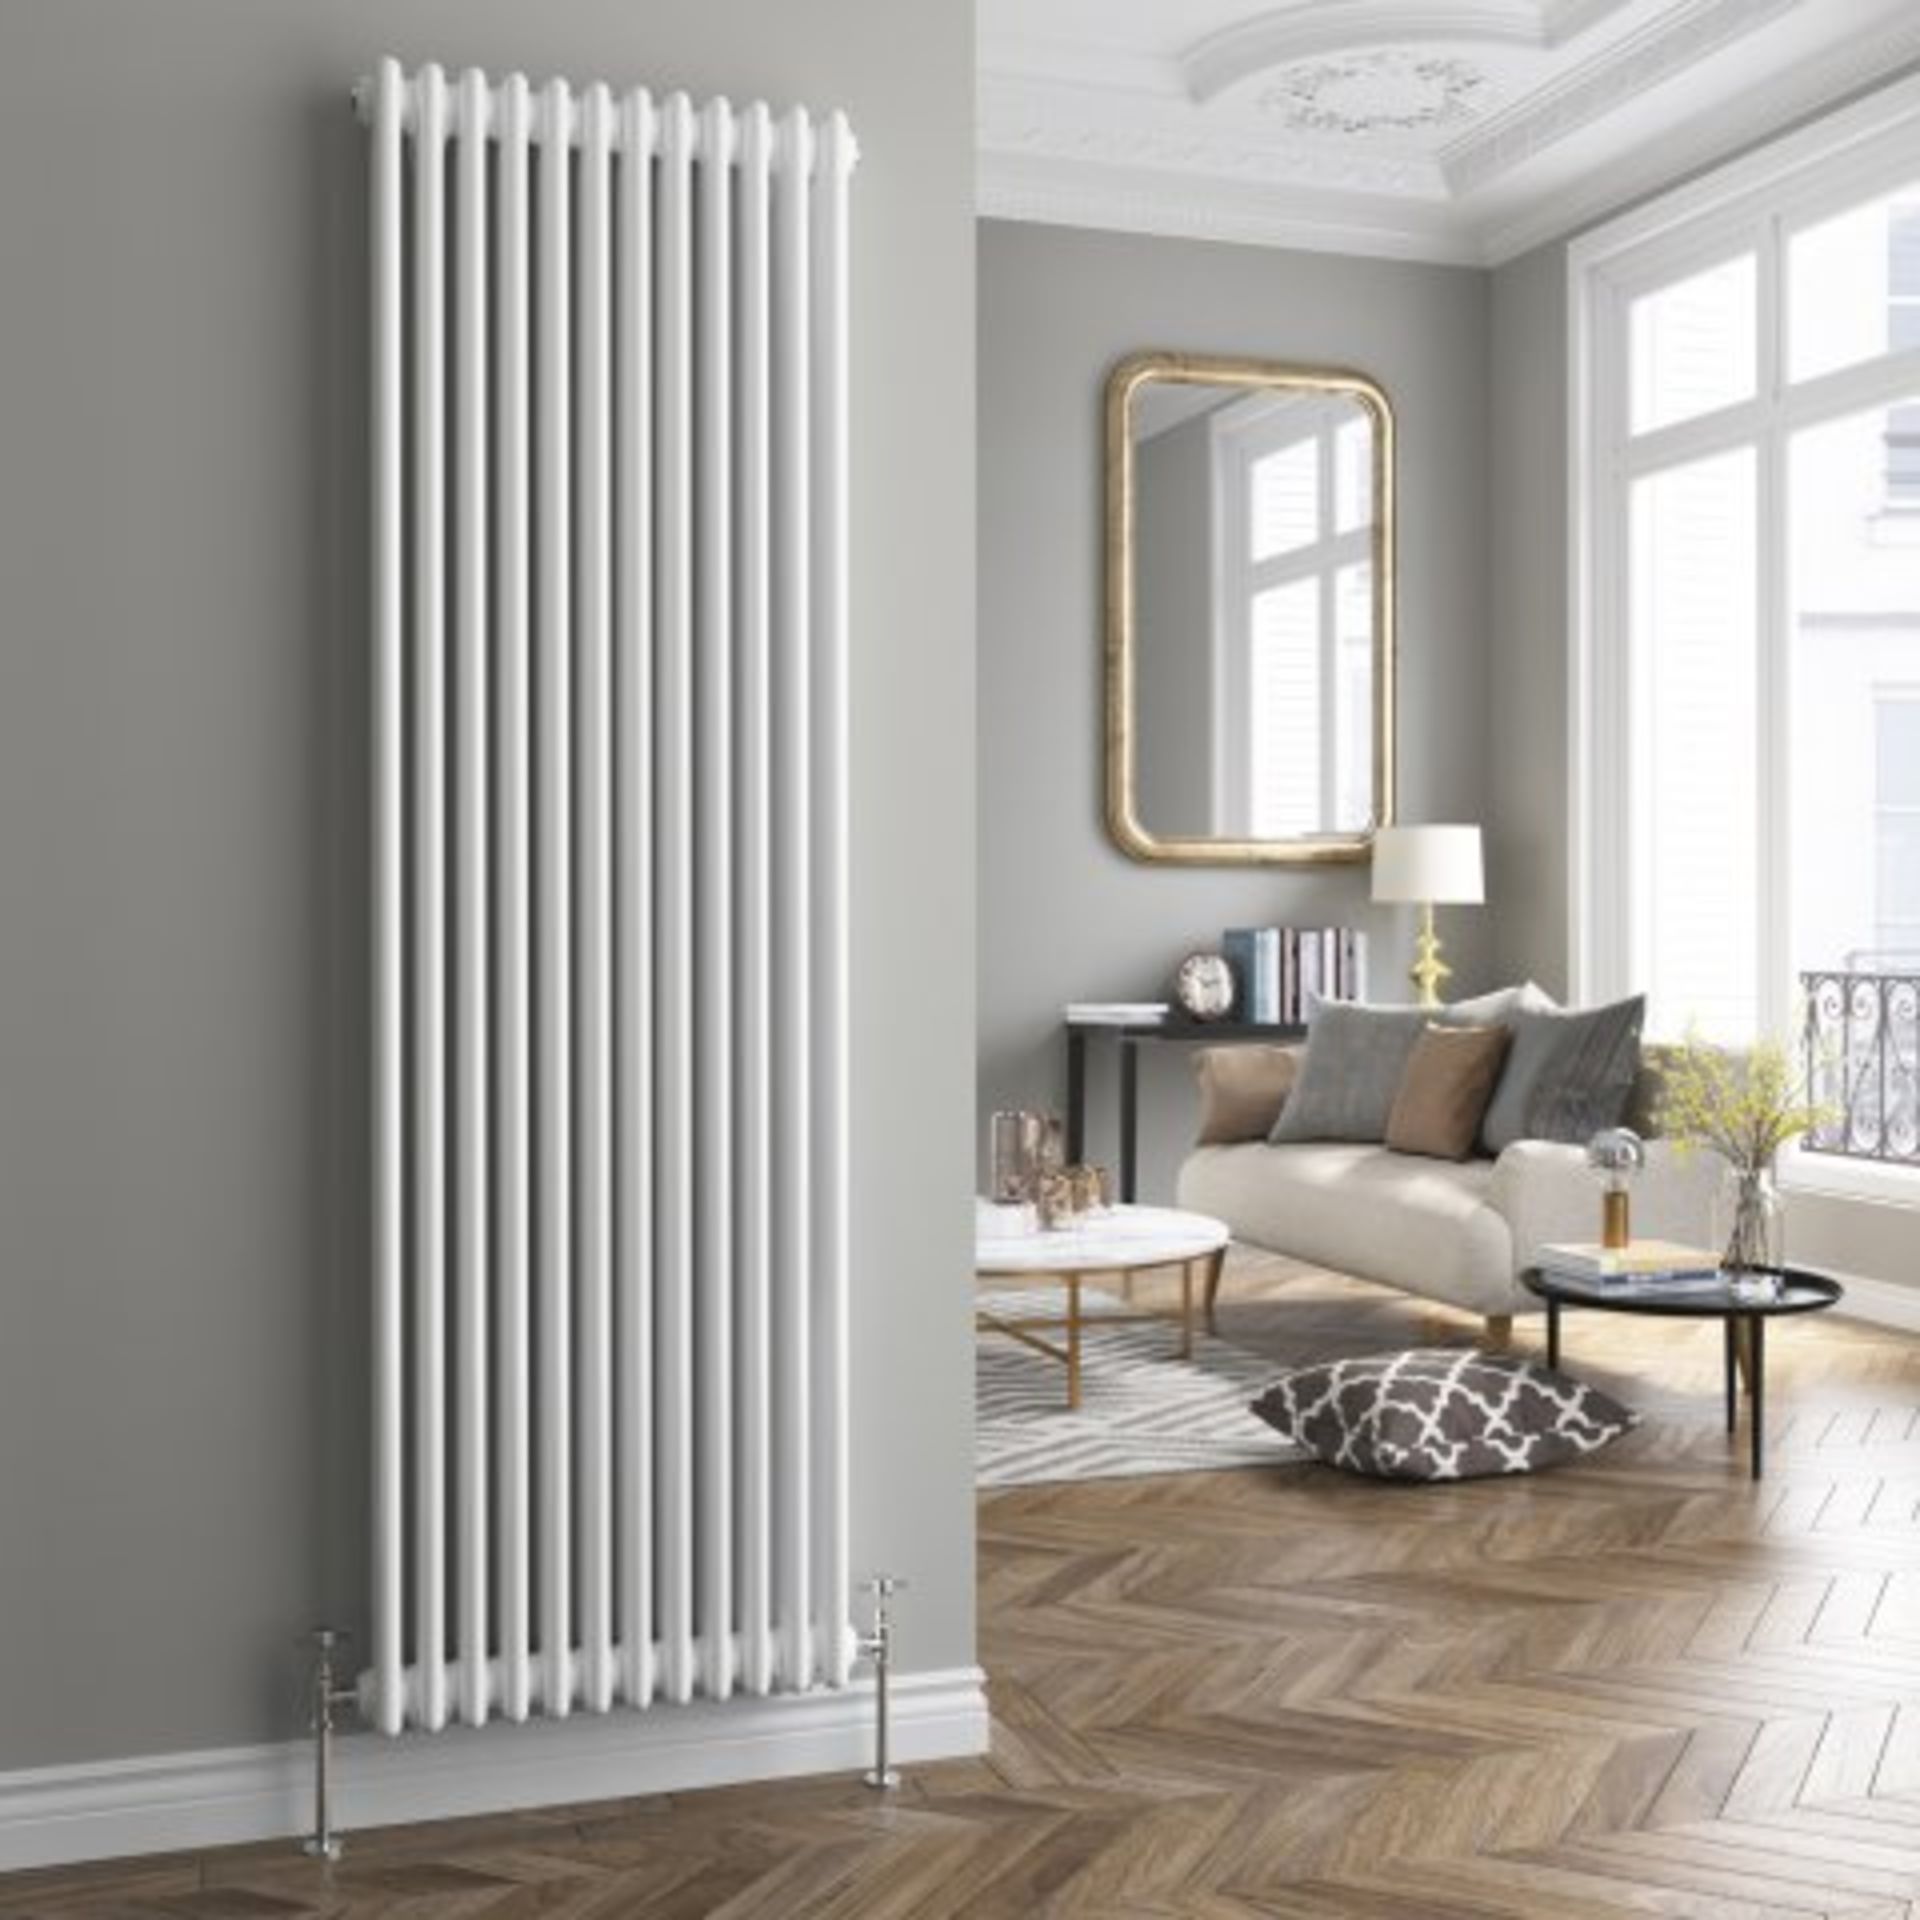 (J4) 1800x554mm White Triple Panel Vertical ColosseumTraditional Radiator. RRP £599.99. Classic - Image 2 of 3